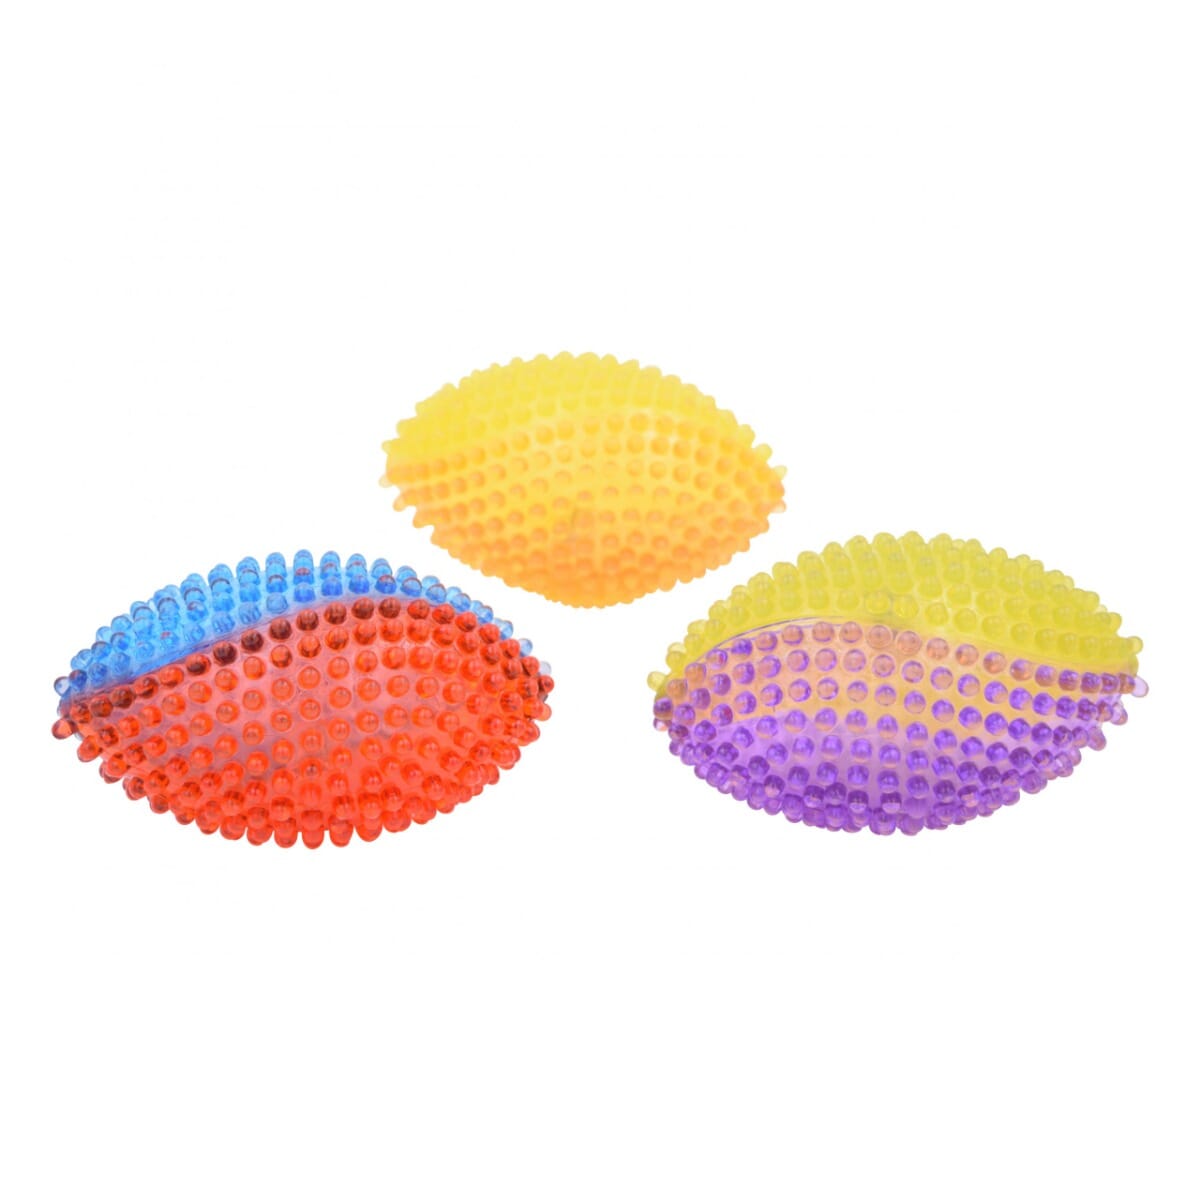 Sensory Kit 3 Spikey Light Up Rugby Balls for Tactile Sensory Play 